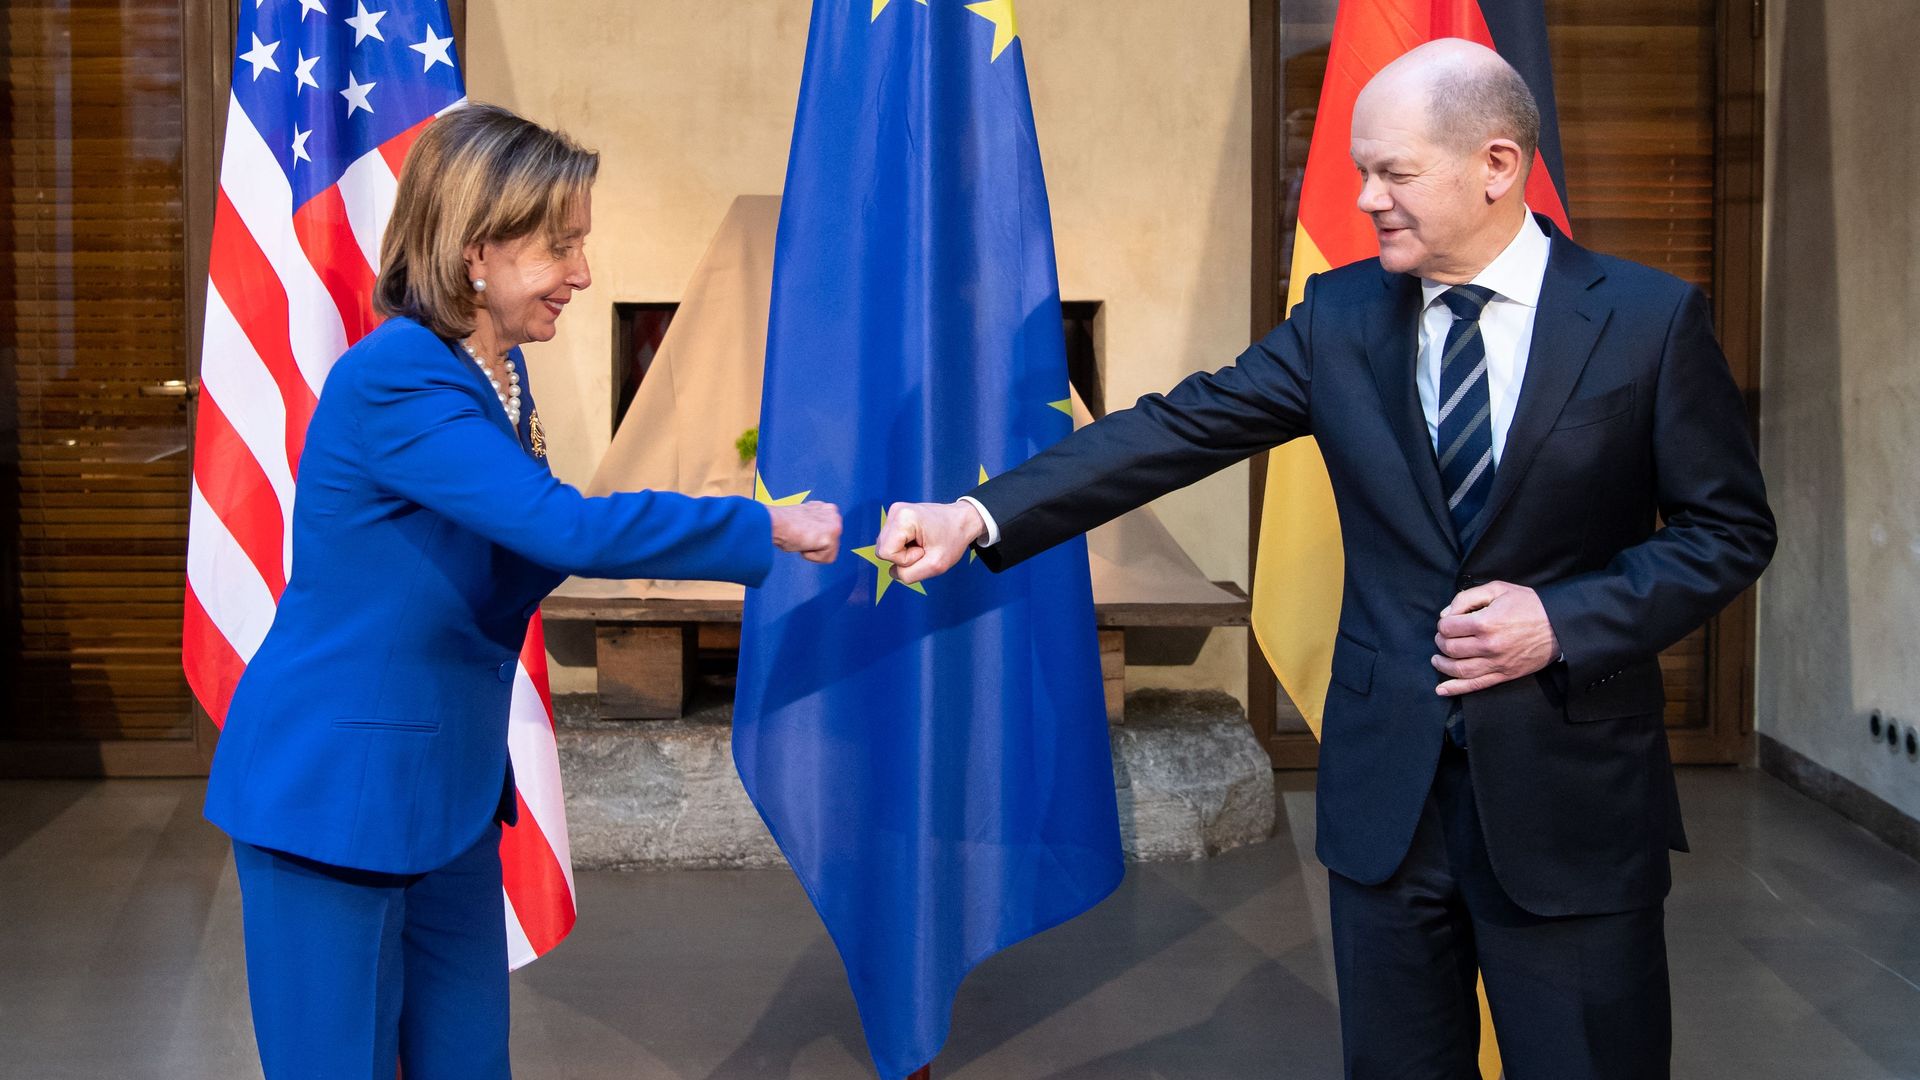 House Speaker Nancy Pelosi is seen fist-bumping with German Chancellor Olaf Scholz.